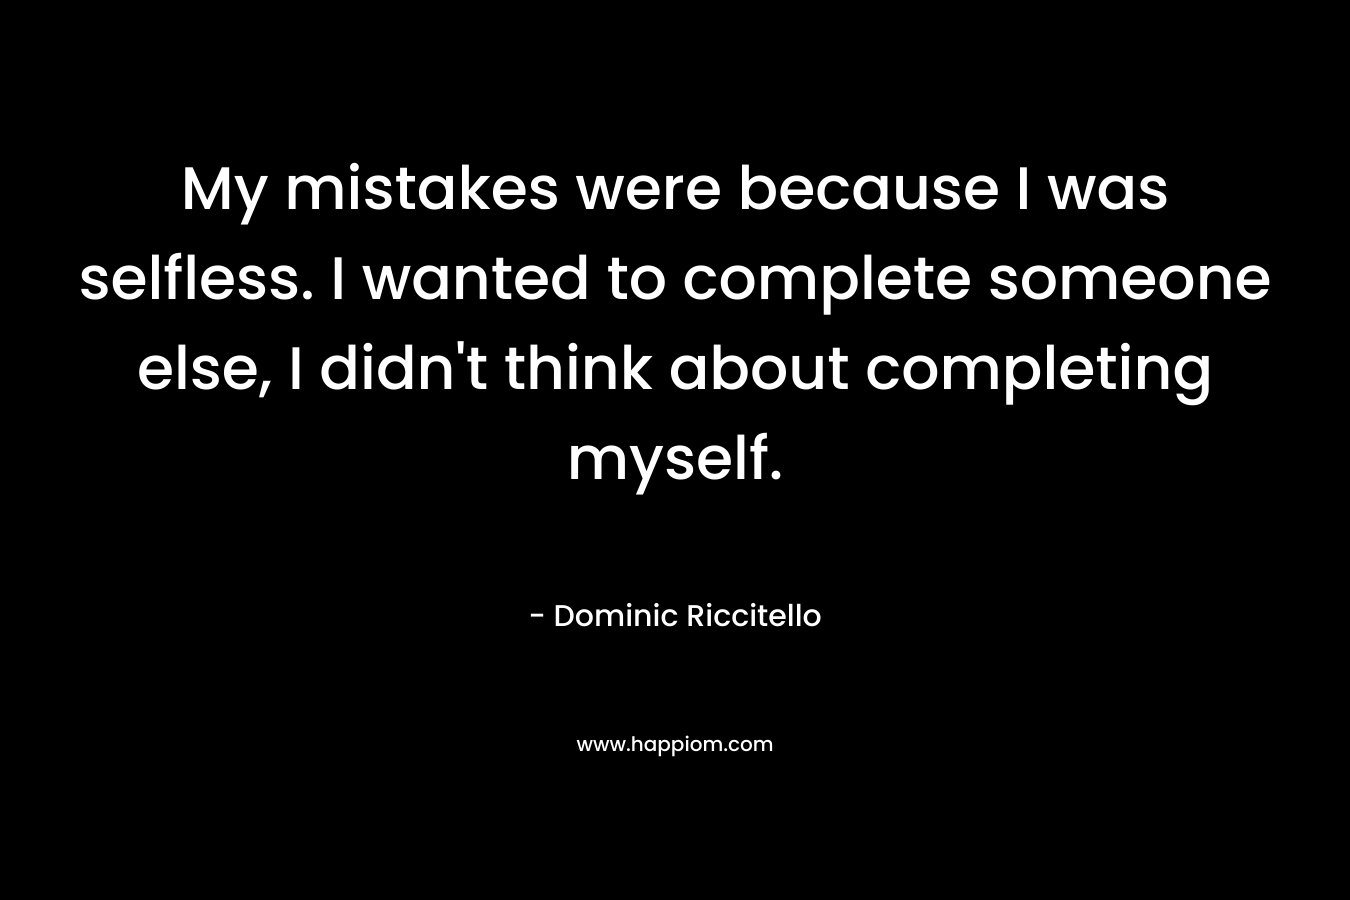 My mistakes were because I was selfless. I wanted to complete someone else, I didn't think about completing myself.